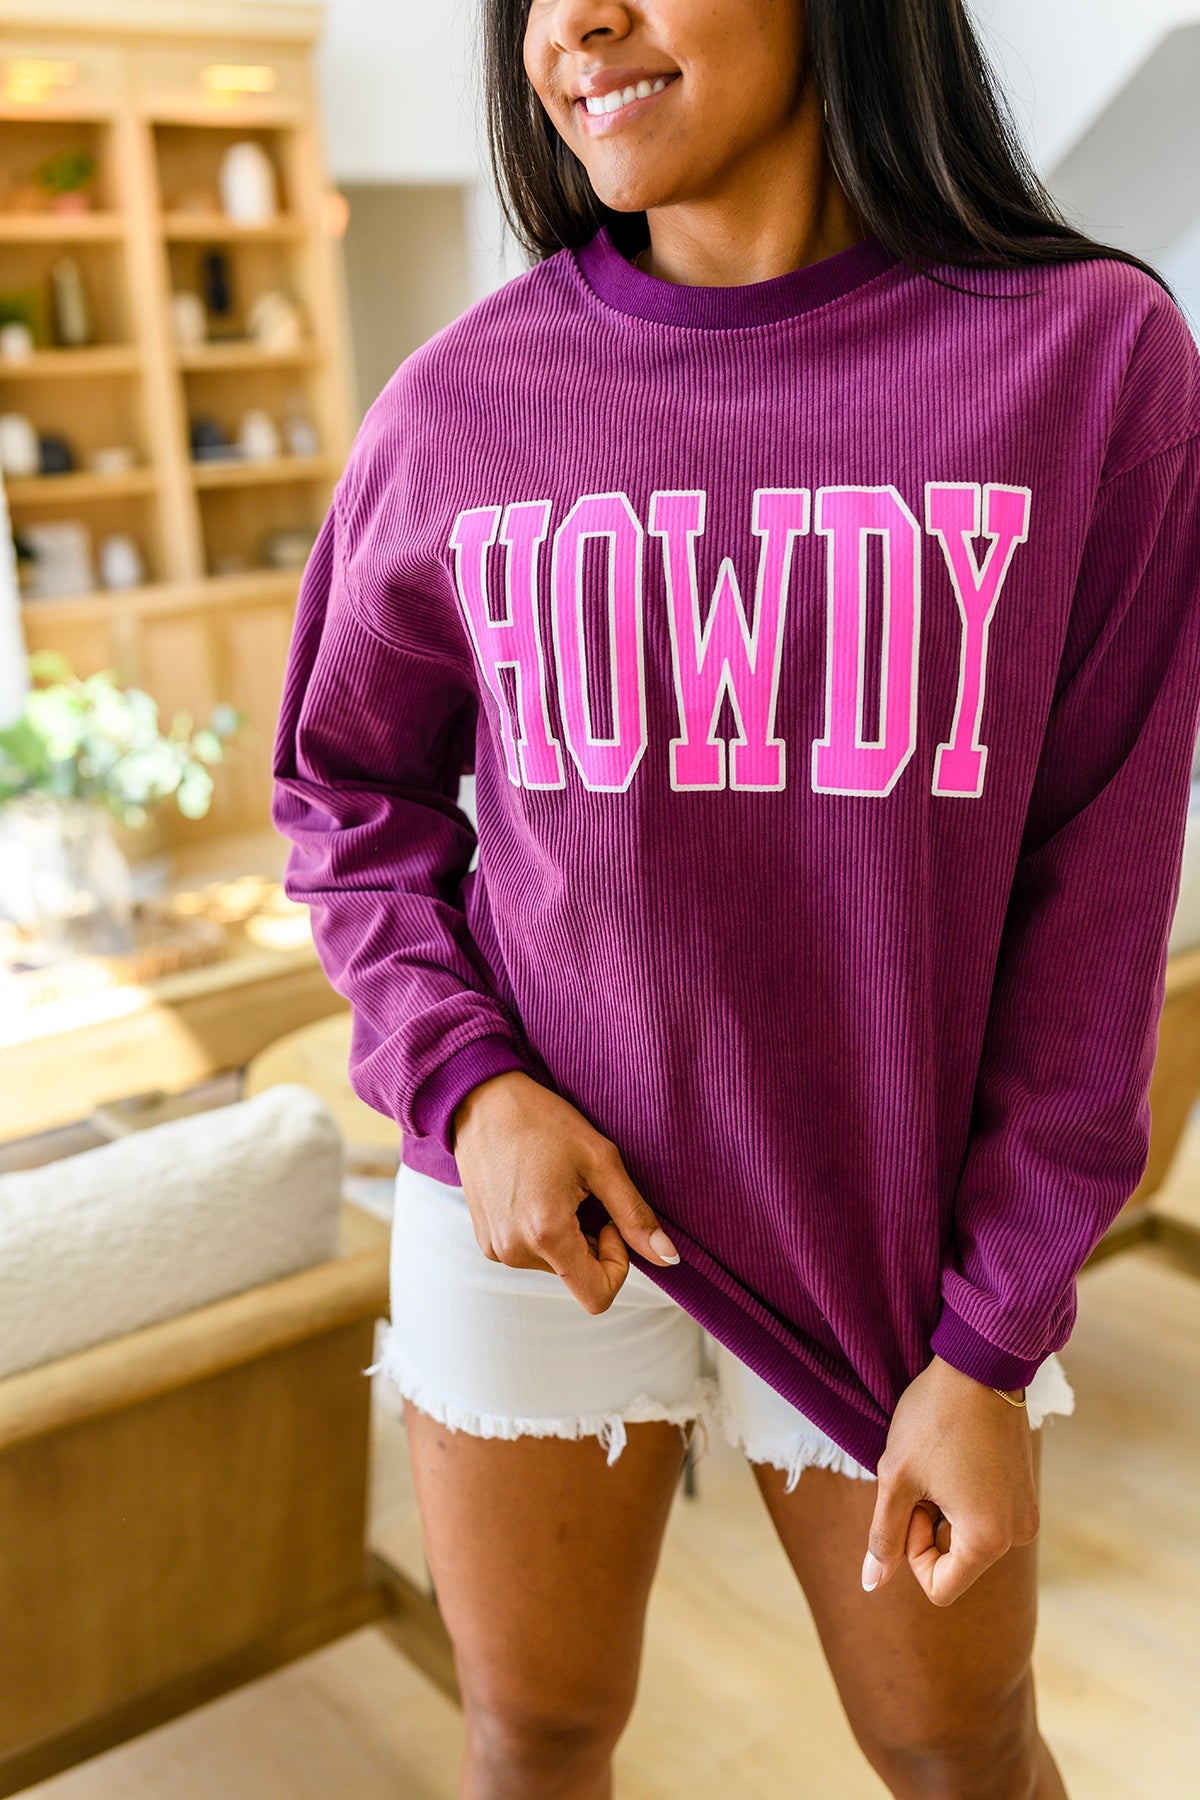 Howdy Textured Sweater